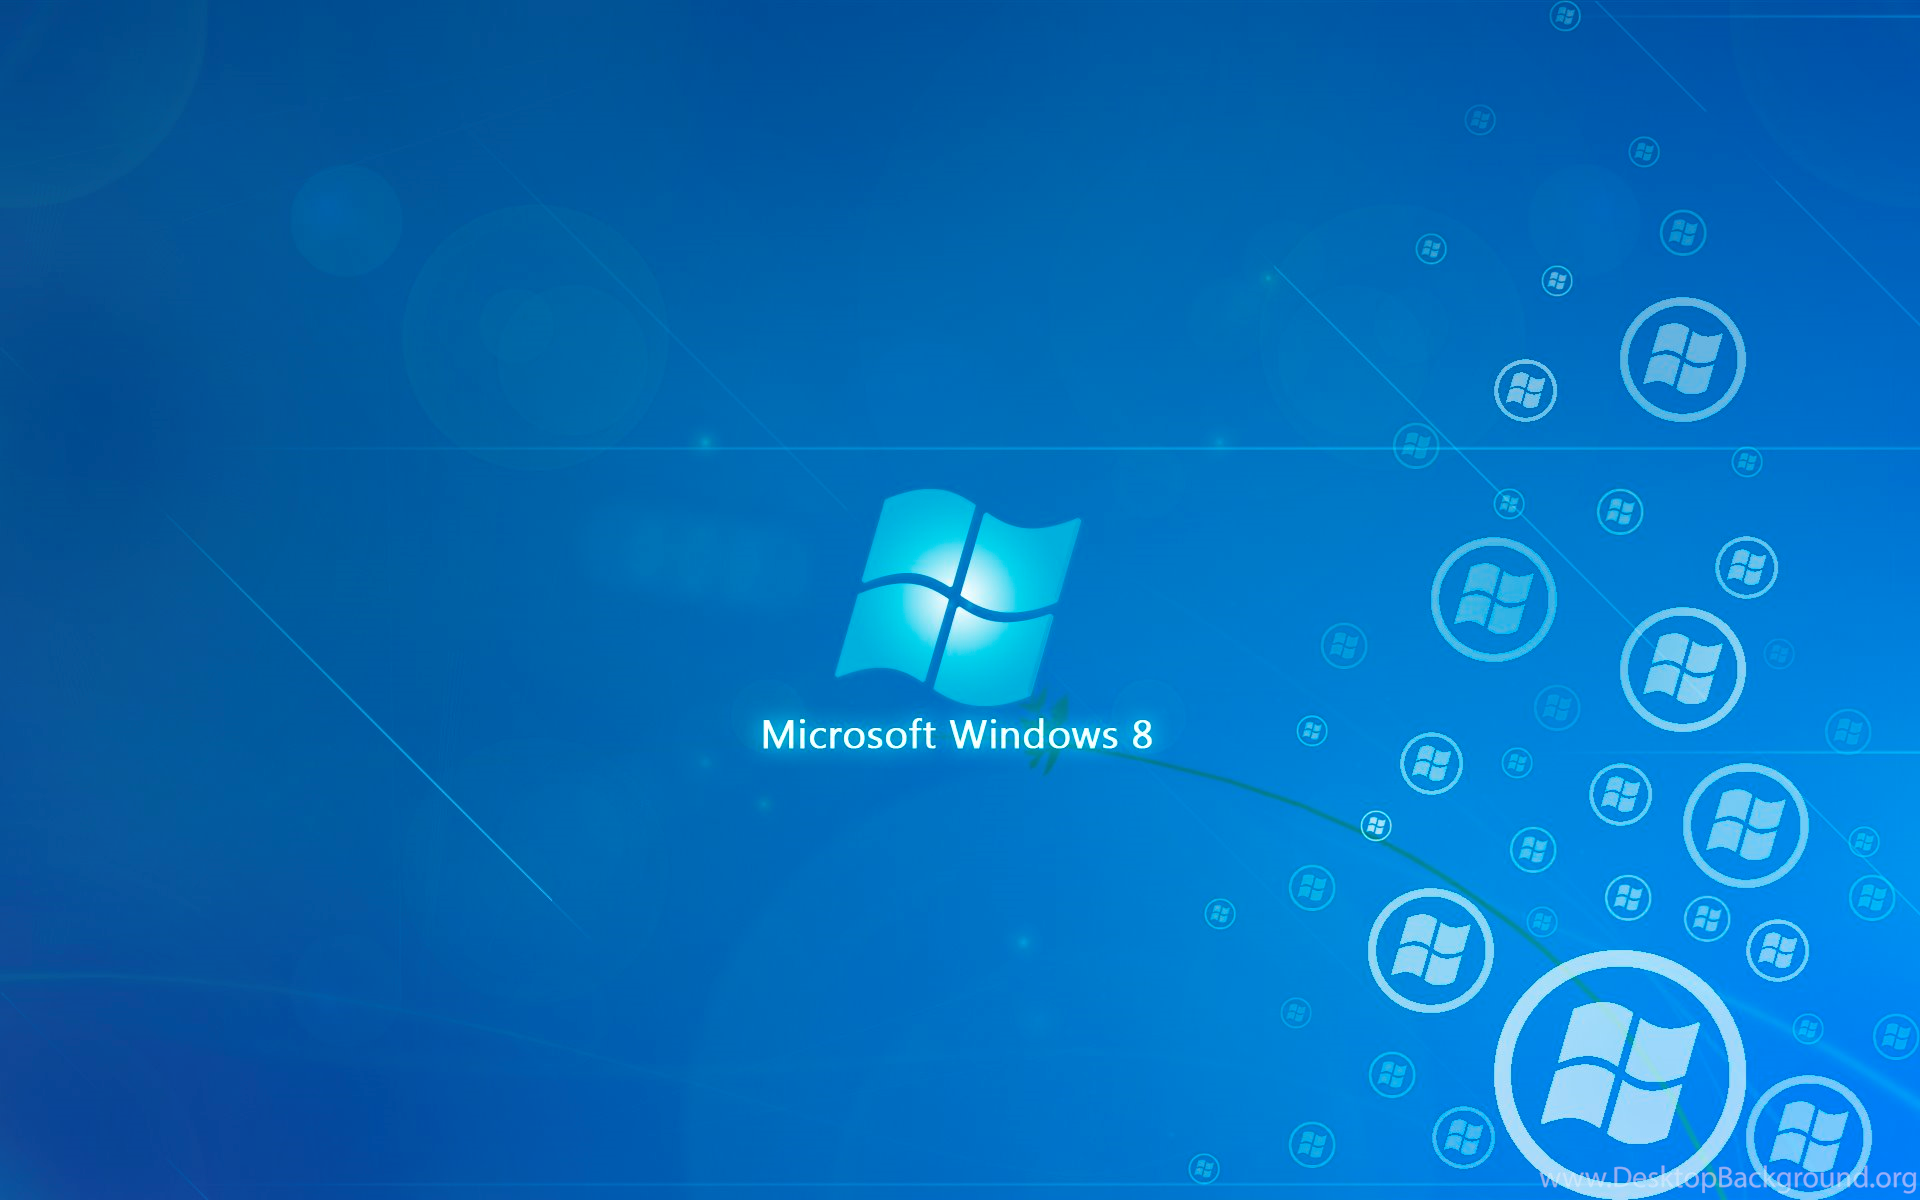 Free Hd Wallpapers For Windows 8 Photo - Windows 8 Wallpaper Download Hd - HD Wallpaper 